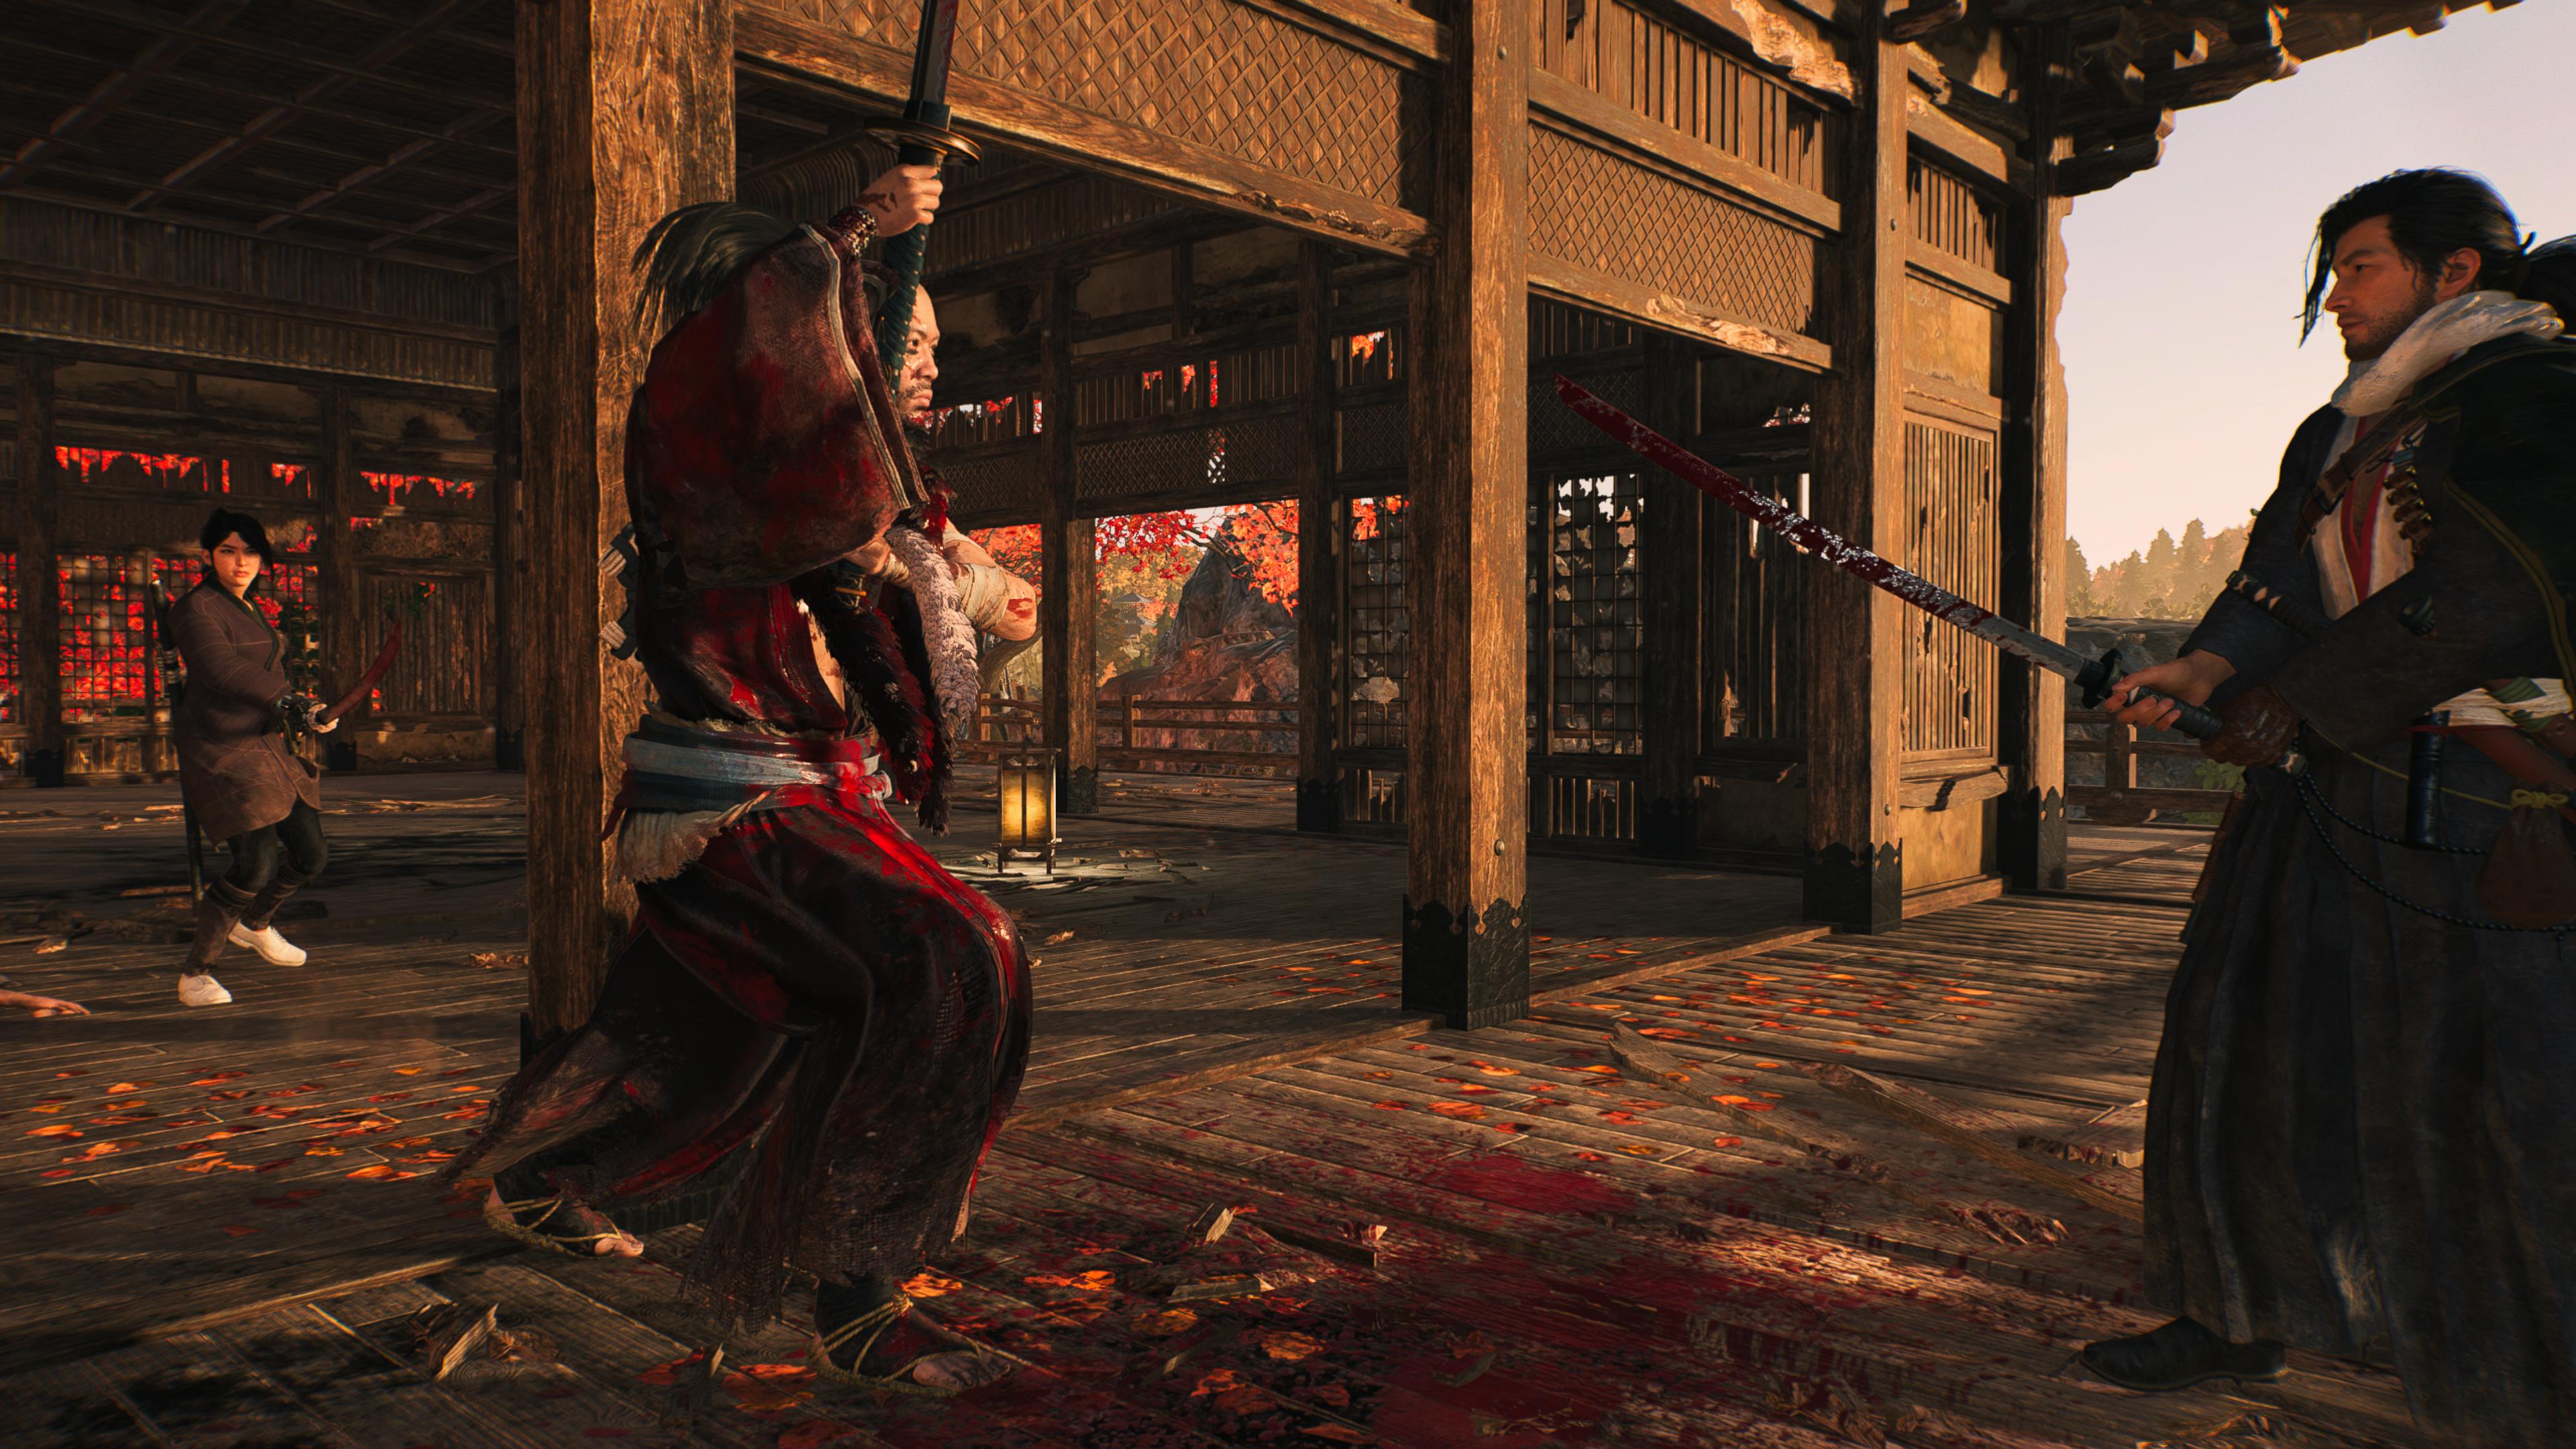 Reseña: Rise of the Ronin, ¿Vale la pena? 29